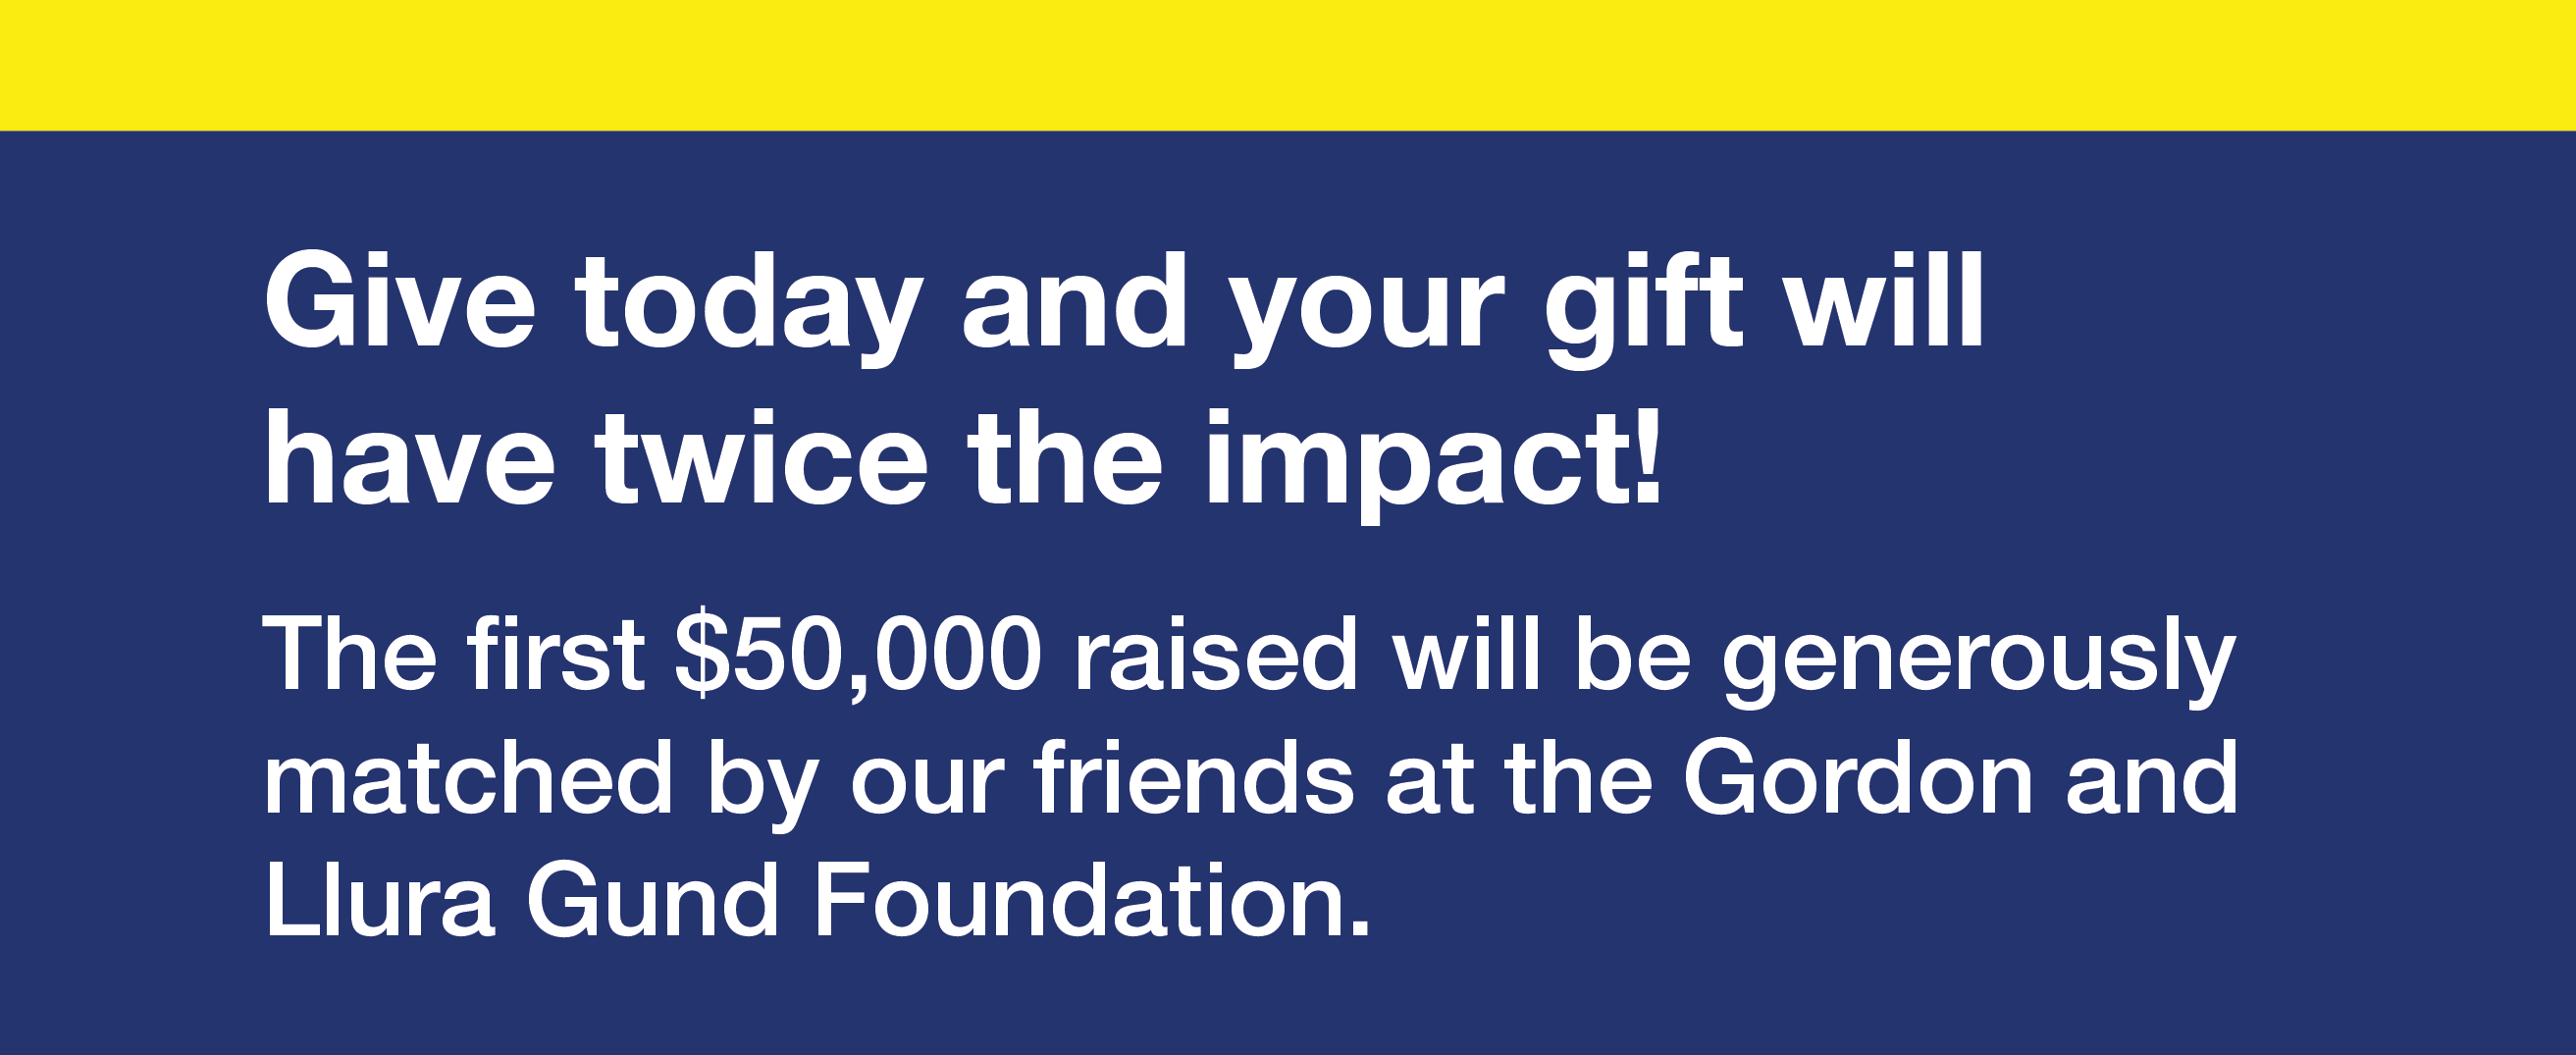 Give today and your gift will have twice the impact! The first $50,000 raised will be generously matched by our friends at the Gordon and Llura Gund Foundation.